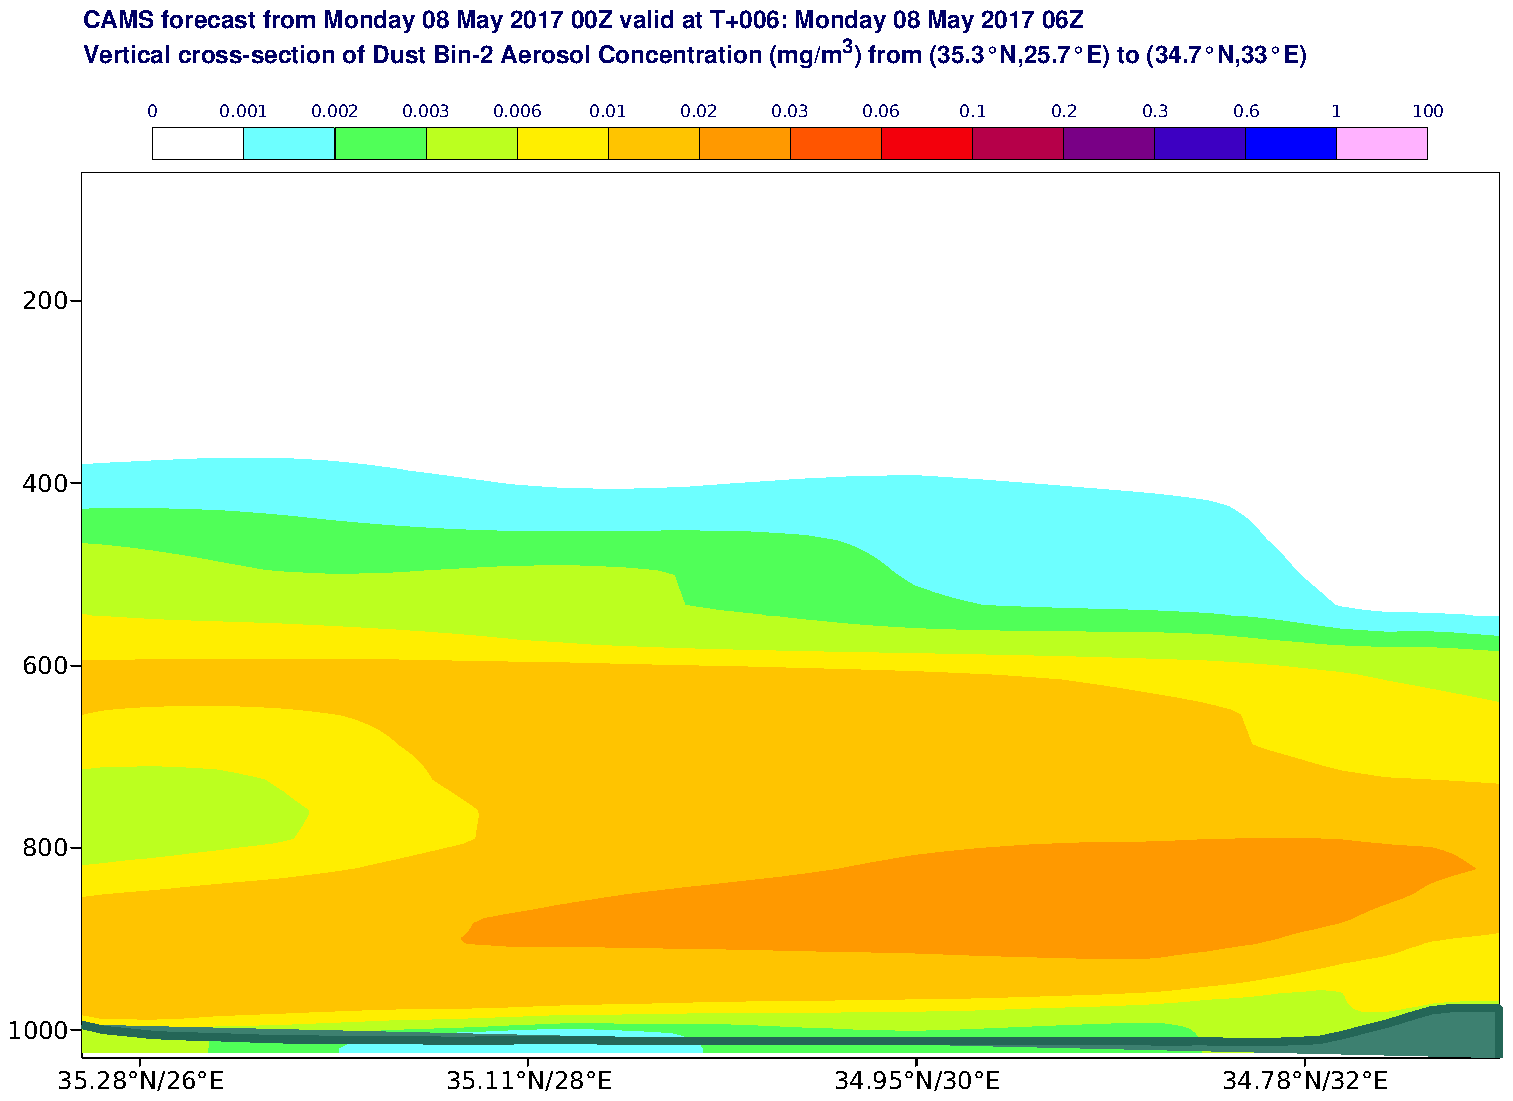 Vertical cross-section of Dust Bin-2 Aerosol Concentration (mg/m3) valid at T6 - 2017-05-08 06:00